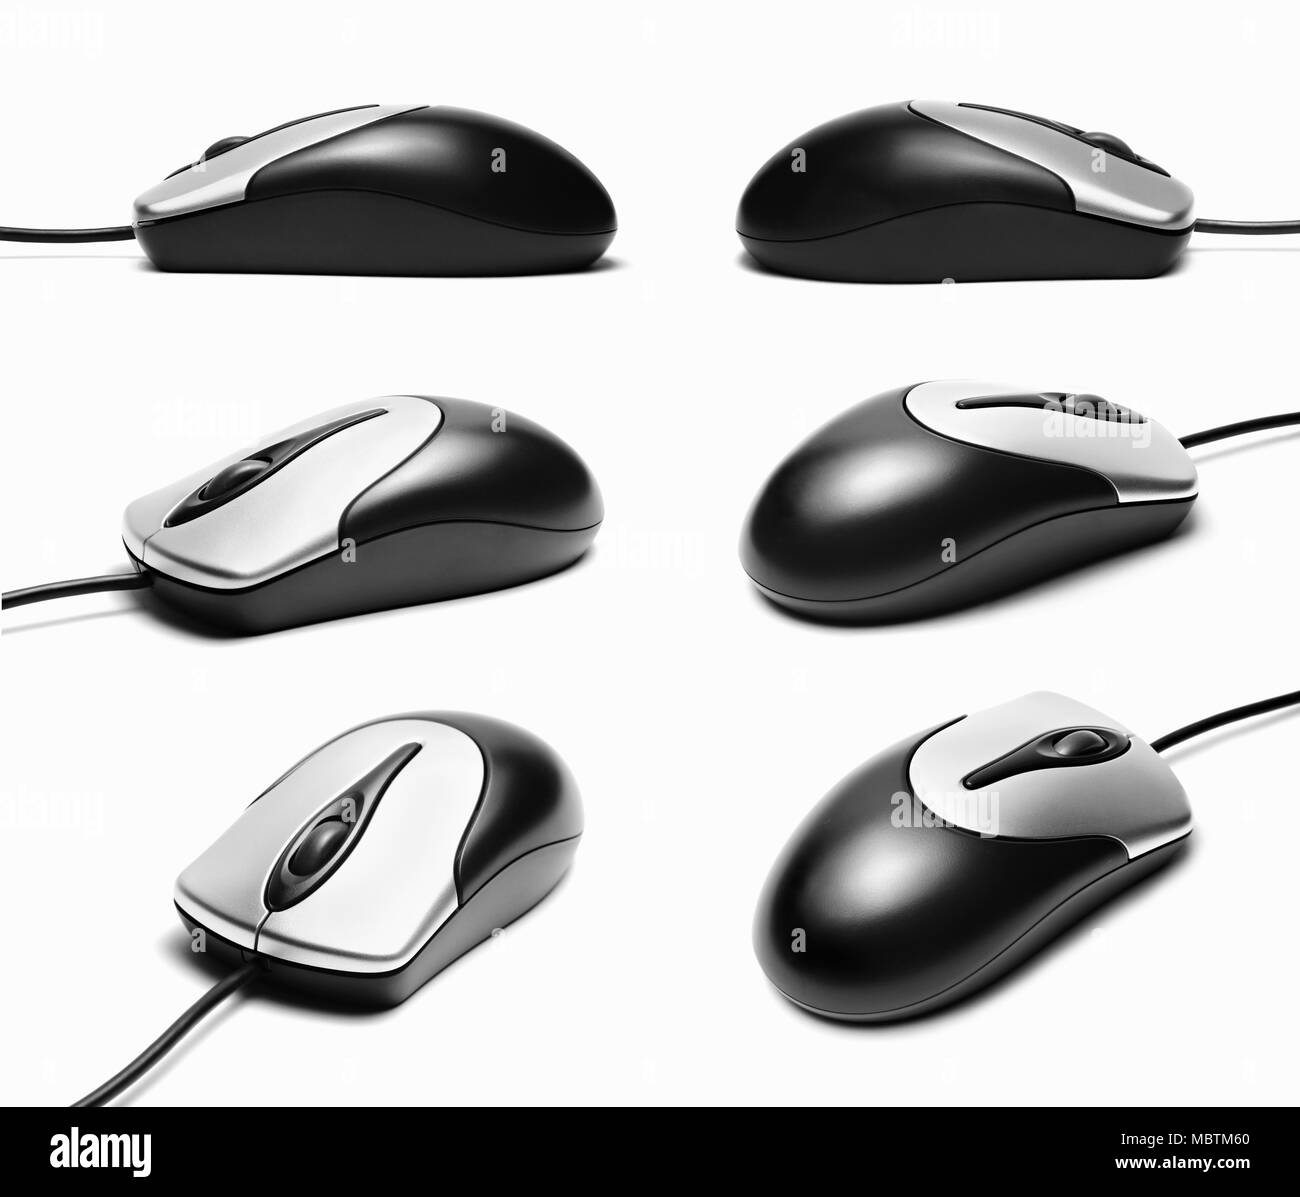 Computer mouse isolated on a white background Stock Photo